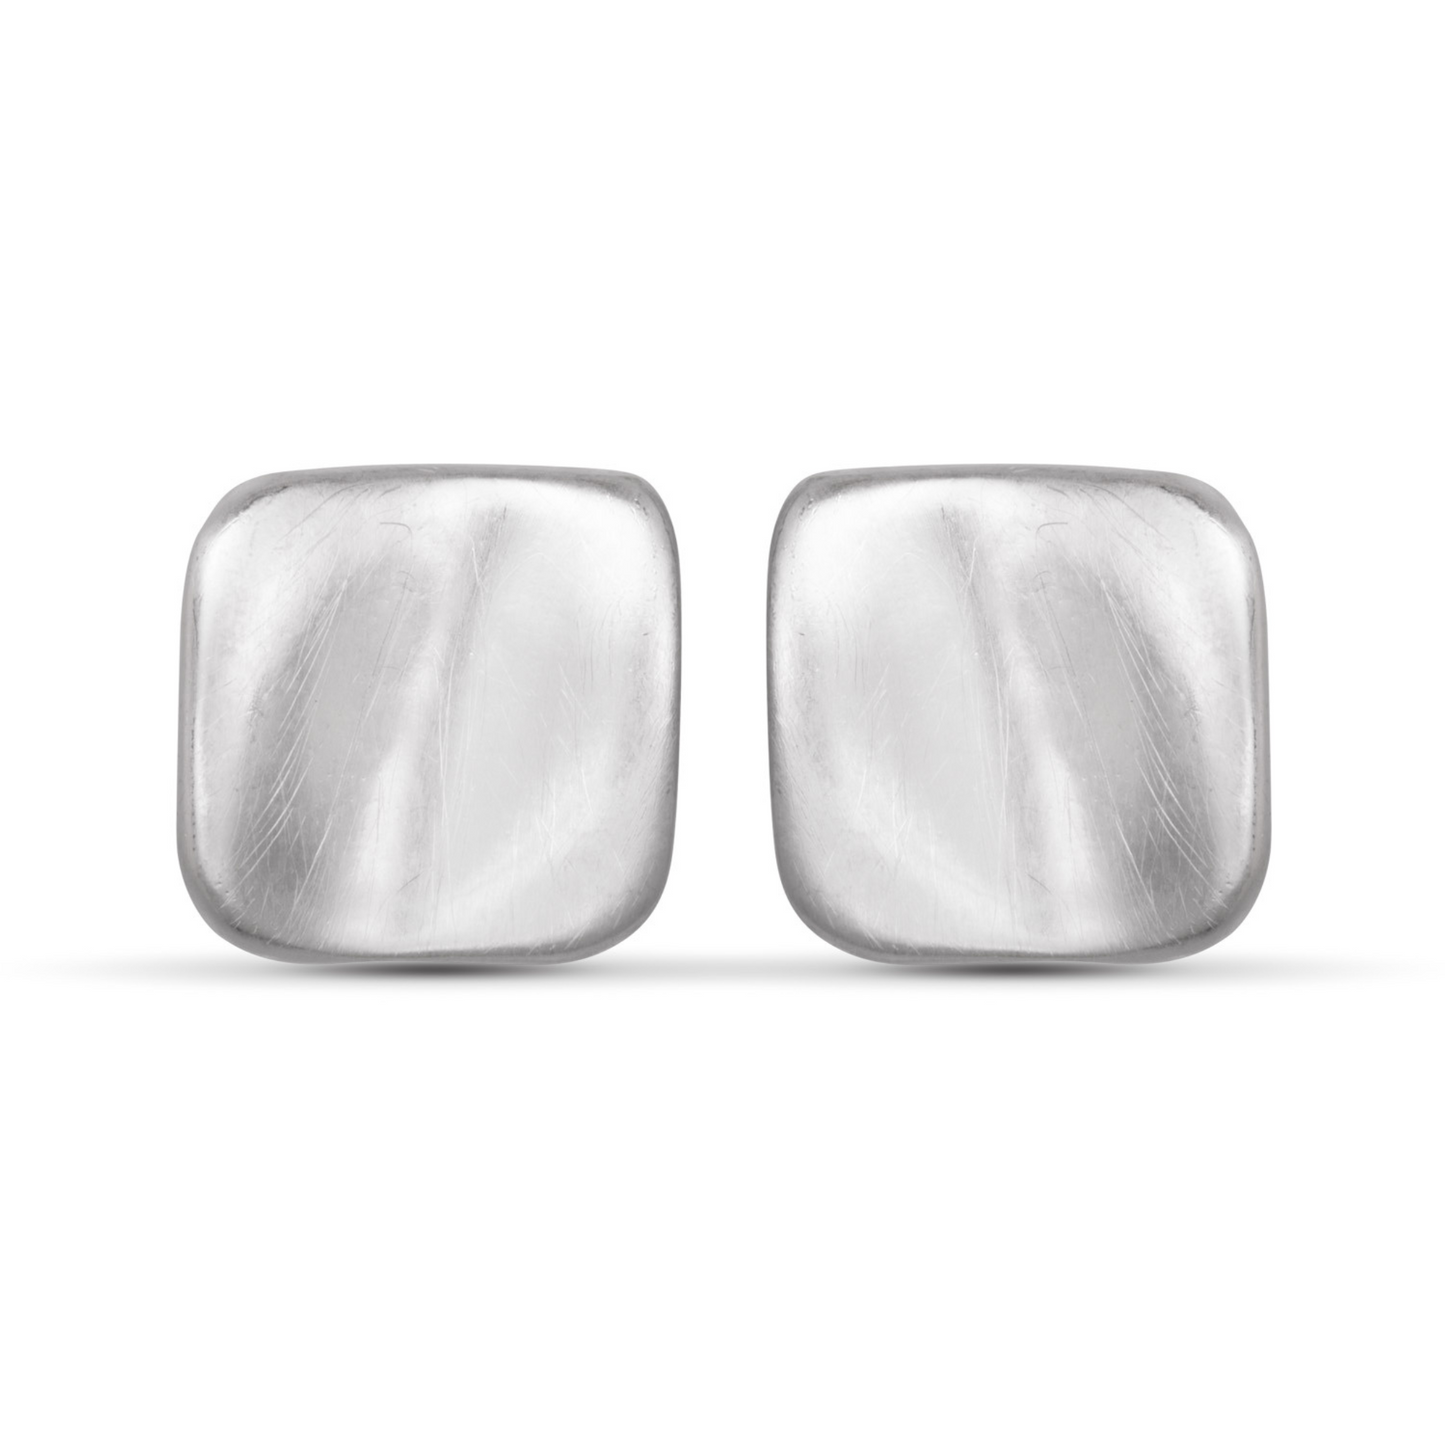 Add a touch of elegance to any outfit with Mia Creased Square Studs. These silver stud earrings feature a sleek matte finish and a unique square design that will elevate your style. Made for everyday wear, these studs are the perfect combination of sophistication and simplicity.